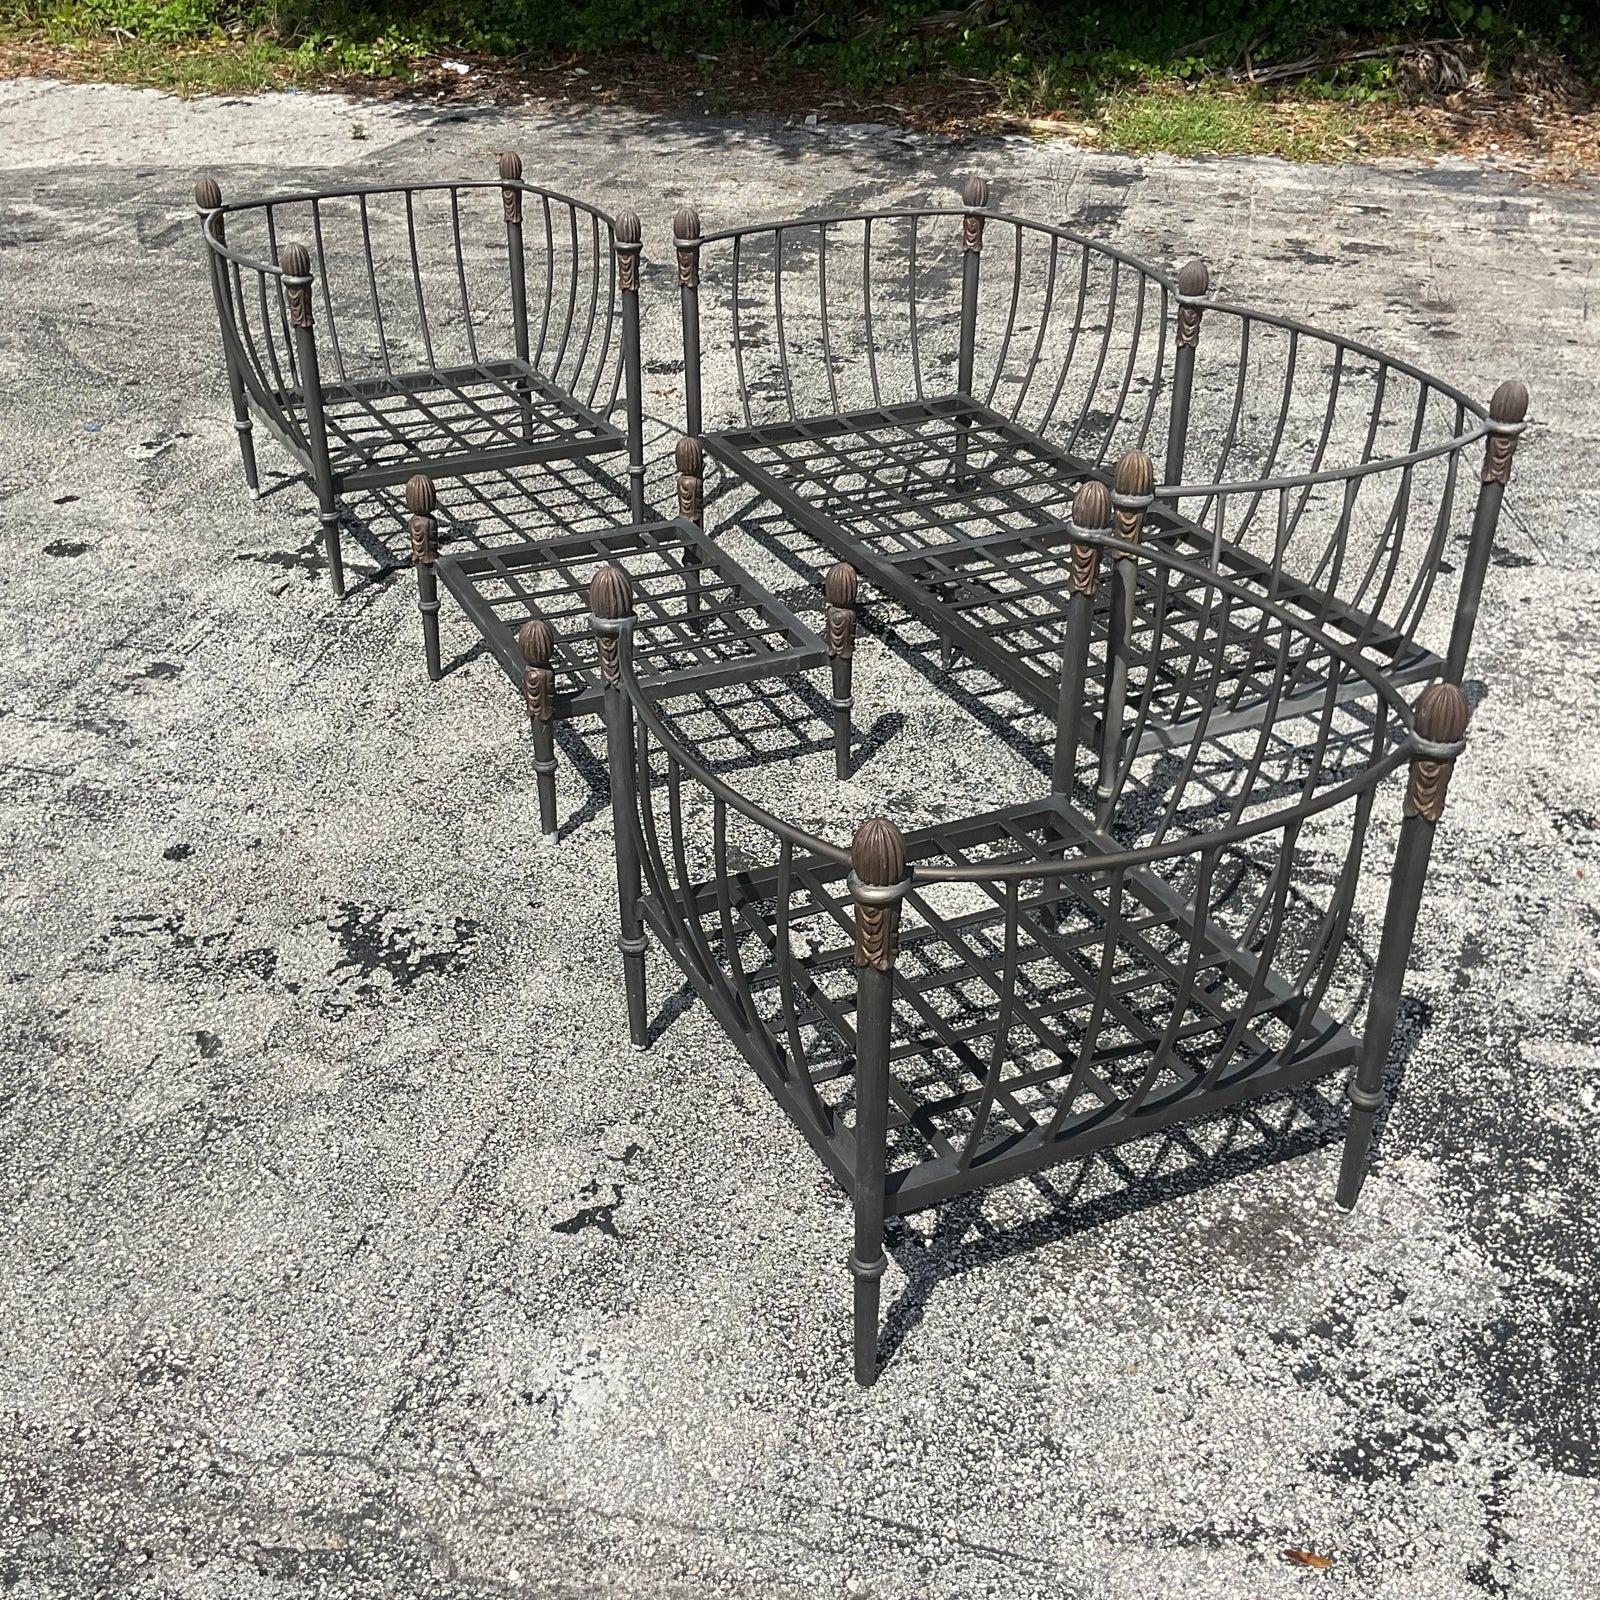 An extraordinary vintage Boho Aluminum patio set. Made by the iconic Michael Taylor, but an even more rare early 2000s collection. Unmarked. The set includes a sofa, two deep lounge chairs and an ottoman. A fabulous set of pale green cushions with a